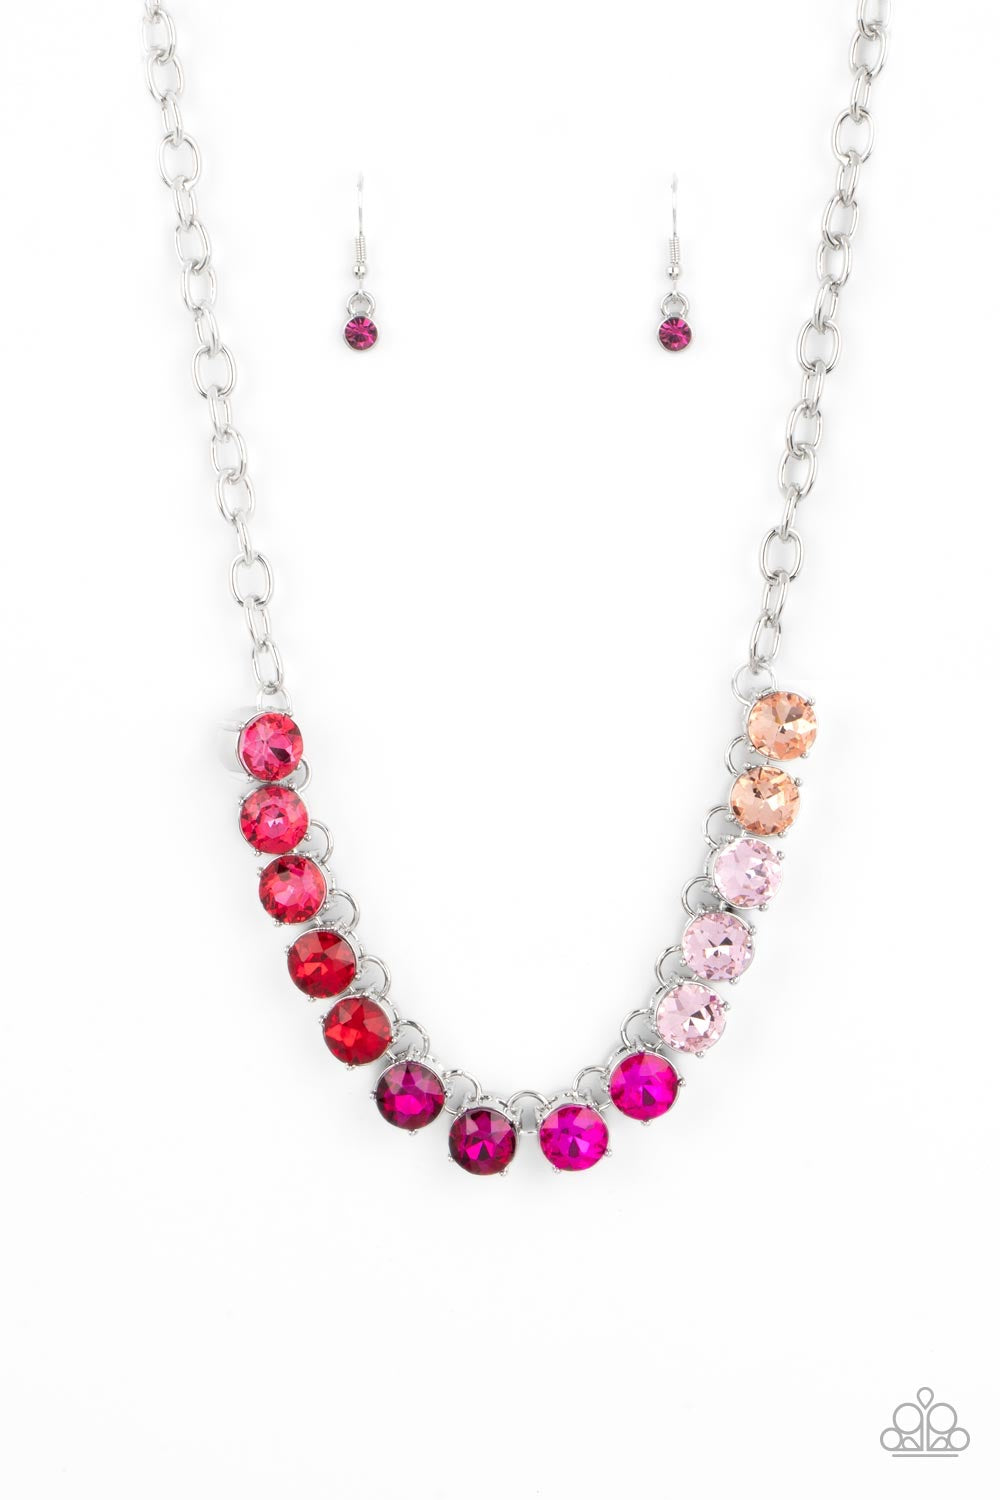 Rainbow Resplendence - Pink Necklace - A Finishing Touch Jewelry